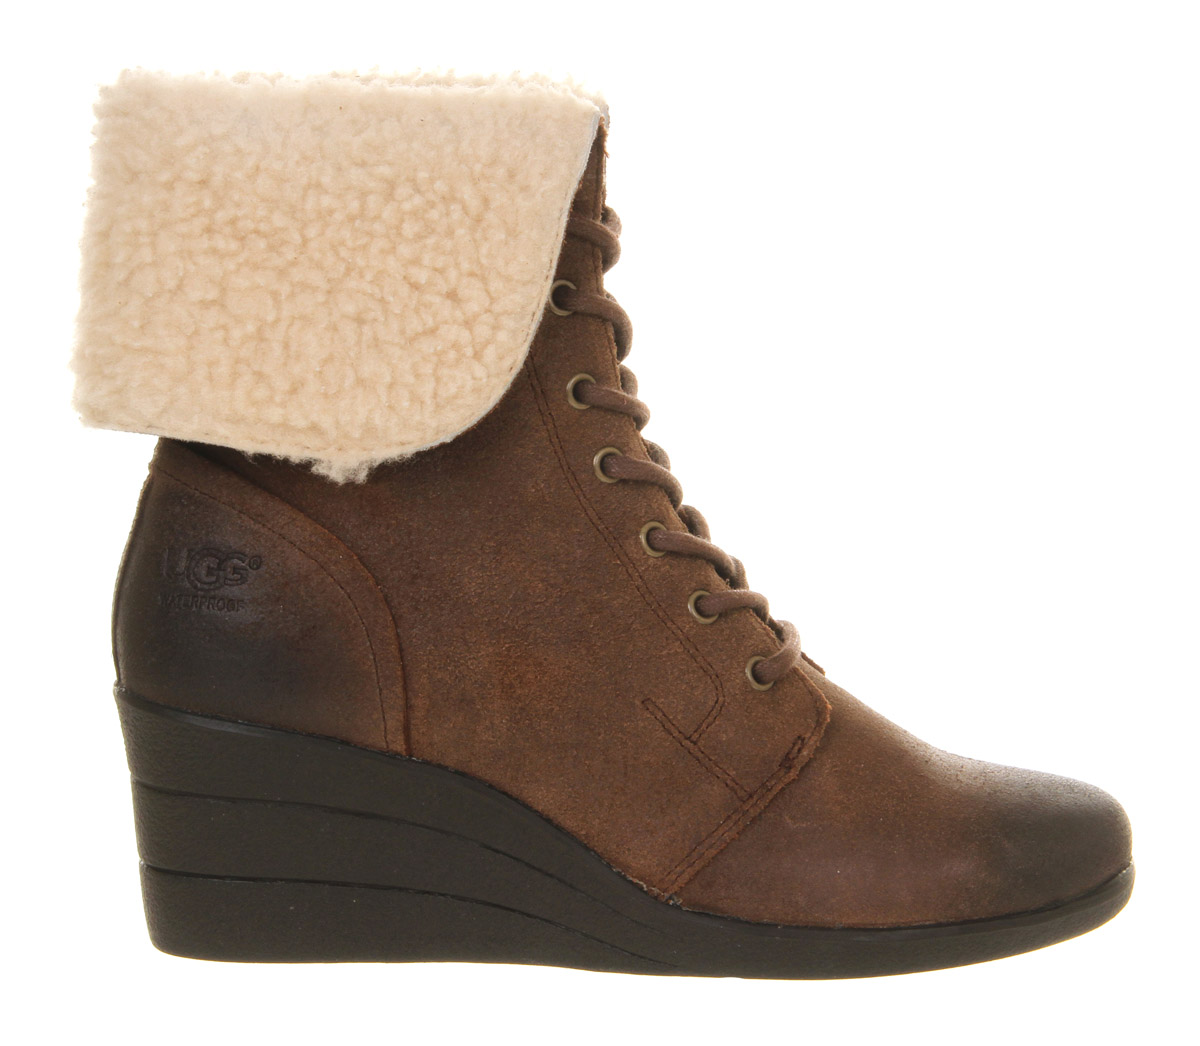 Ugg Zea Shearling Wedge Lace Up Boots in Brown (chocolate) | Lyst